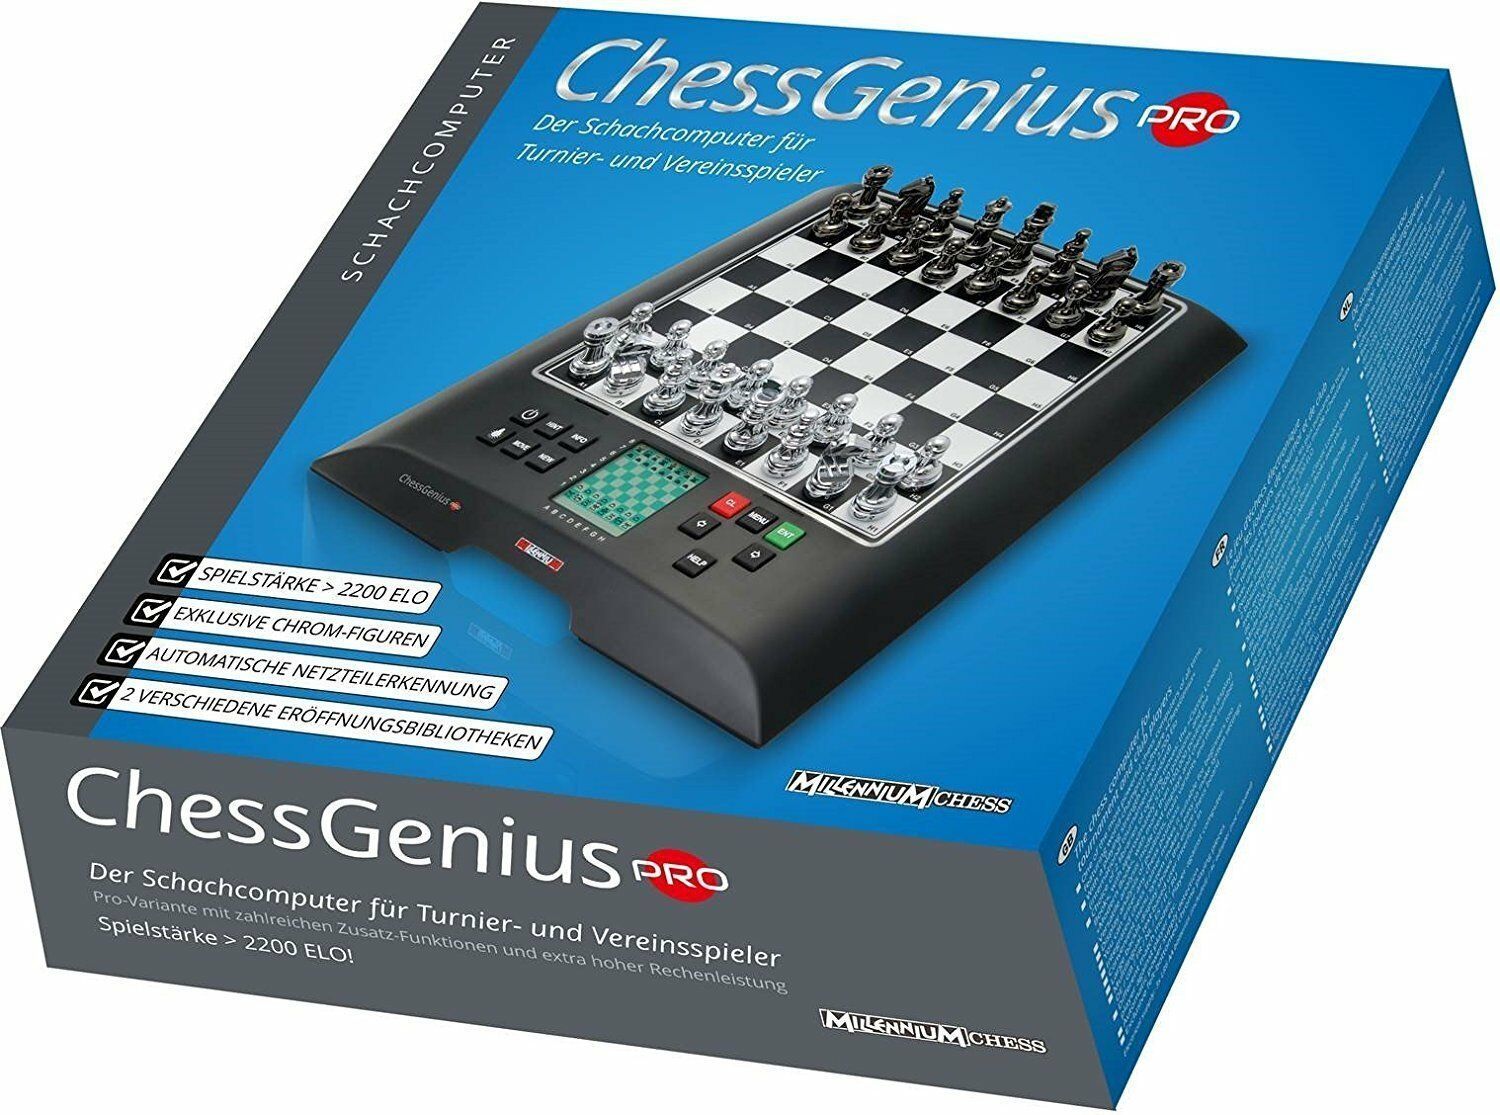 Digital Electronic Chess Computer @